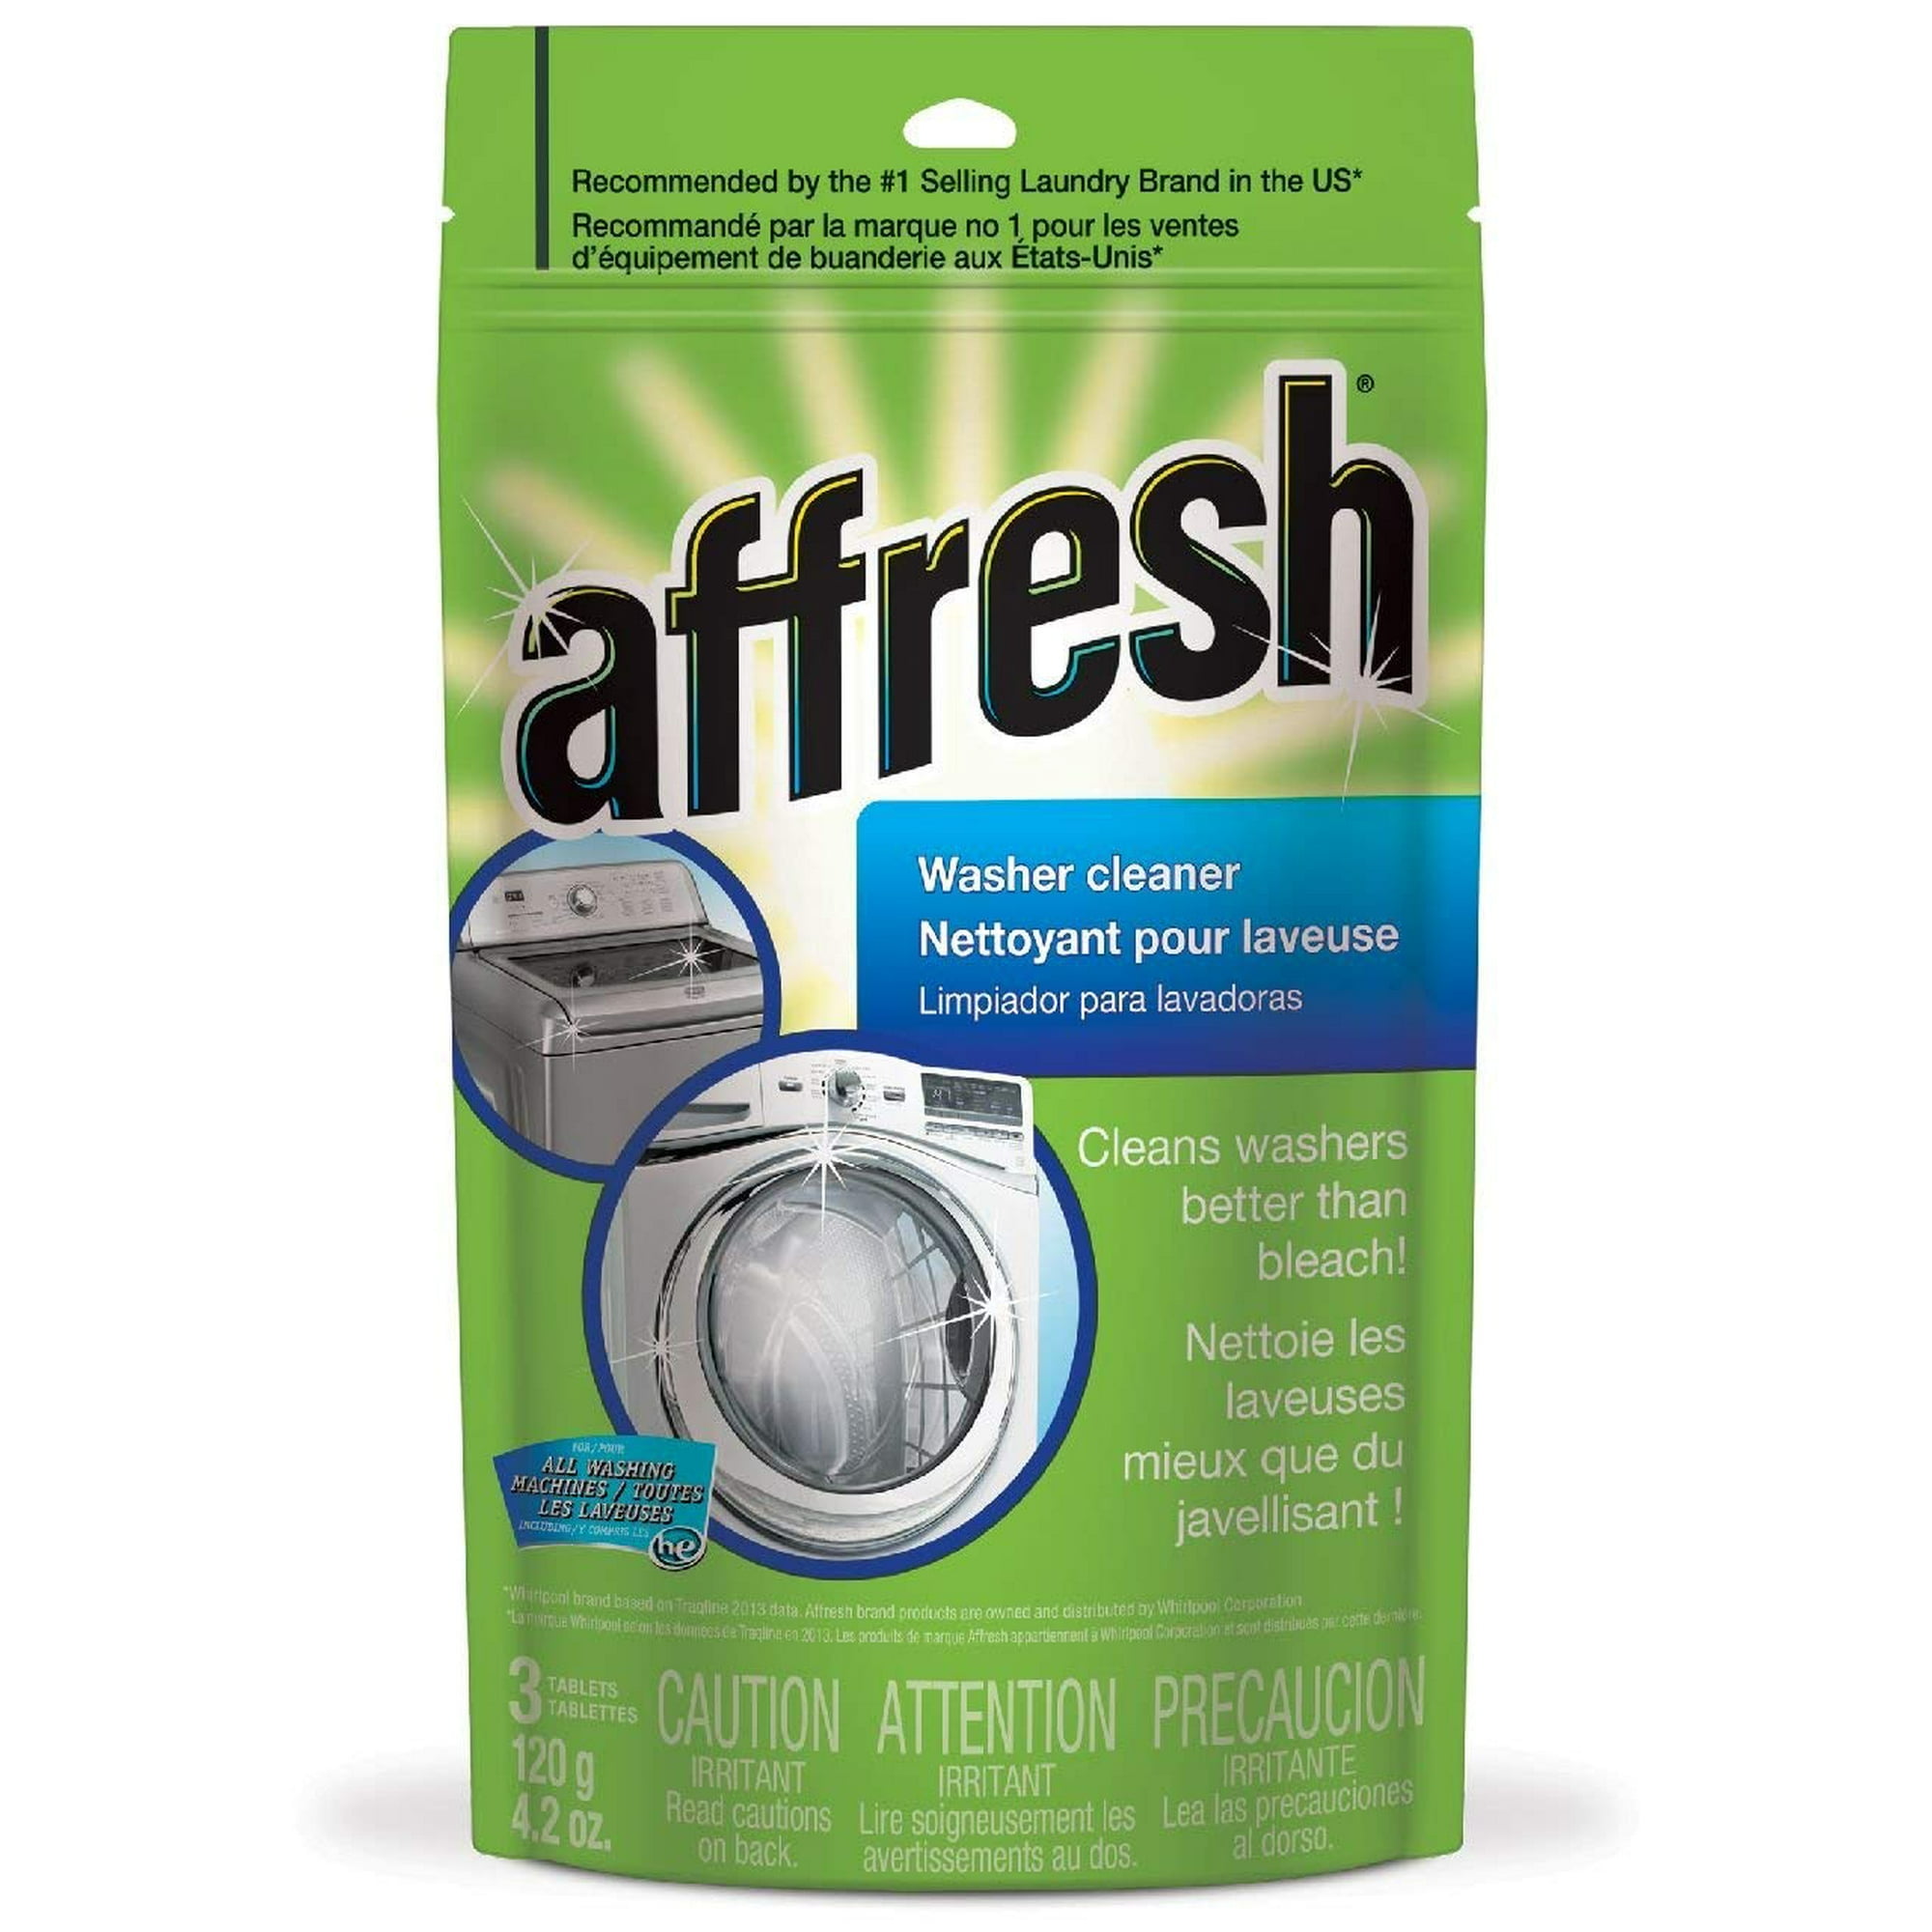 Why reviewers love the Affresh Washing Machine Cleaner